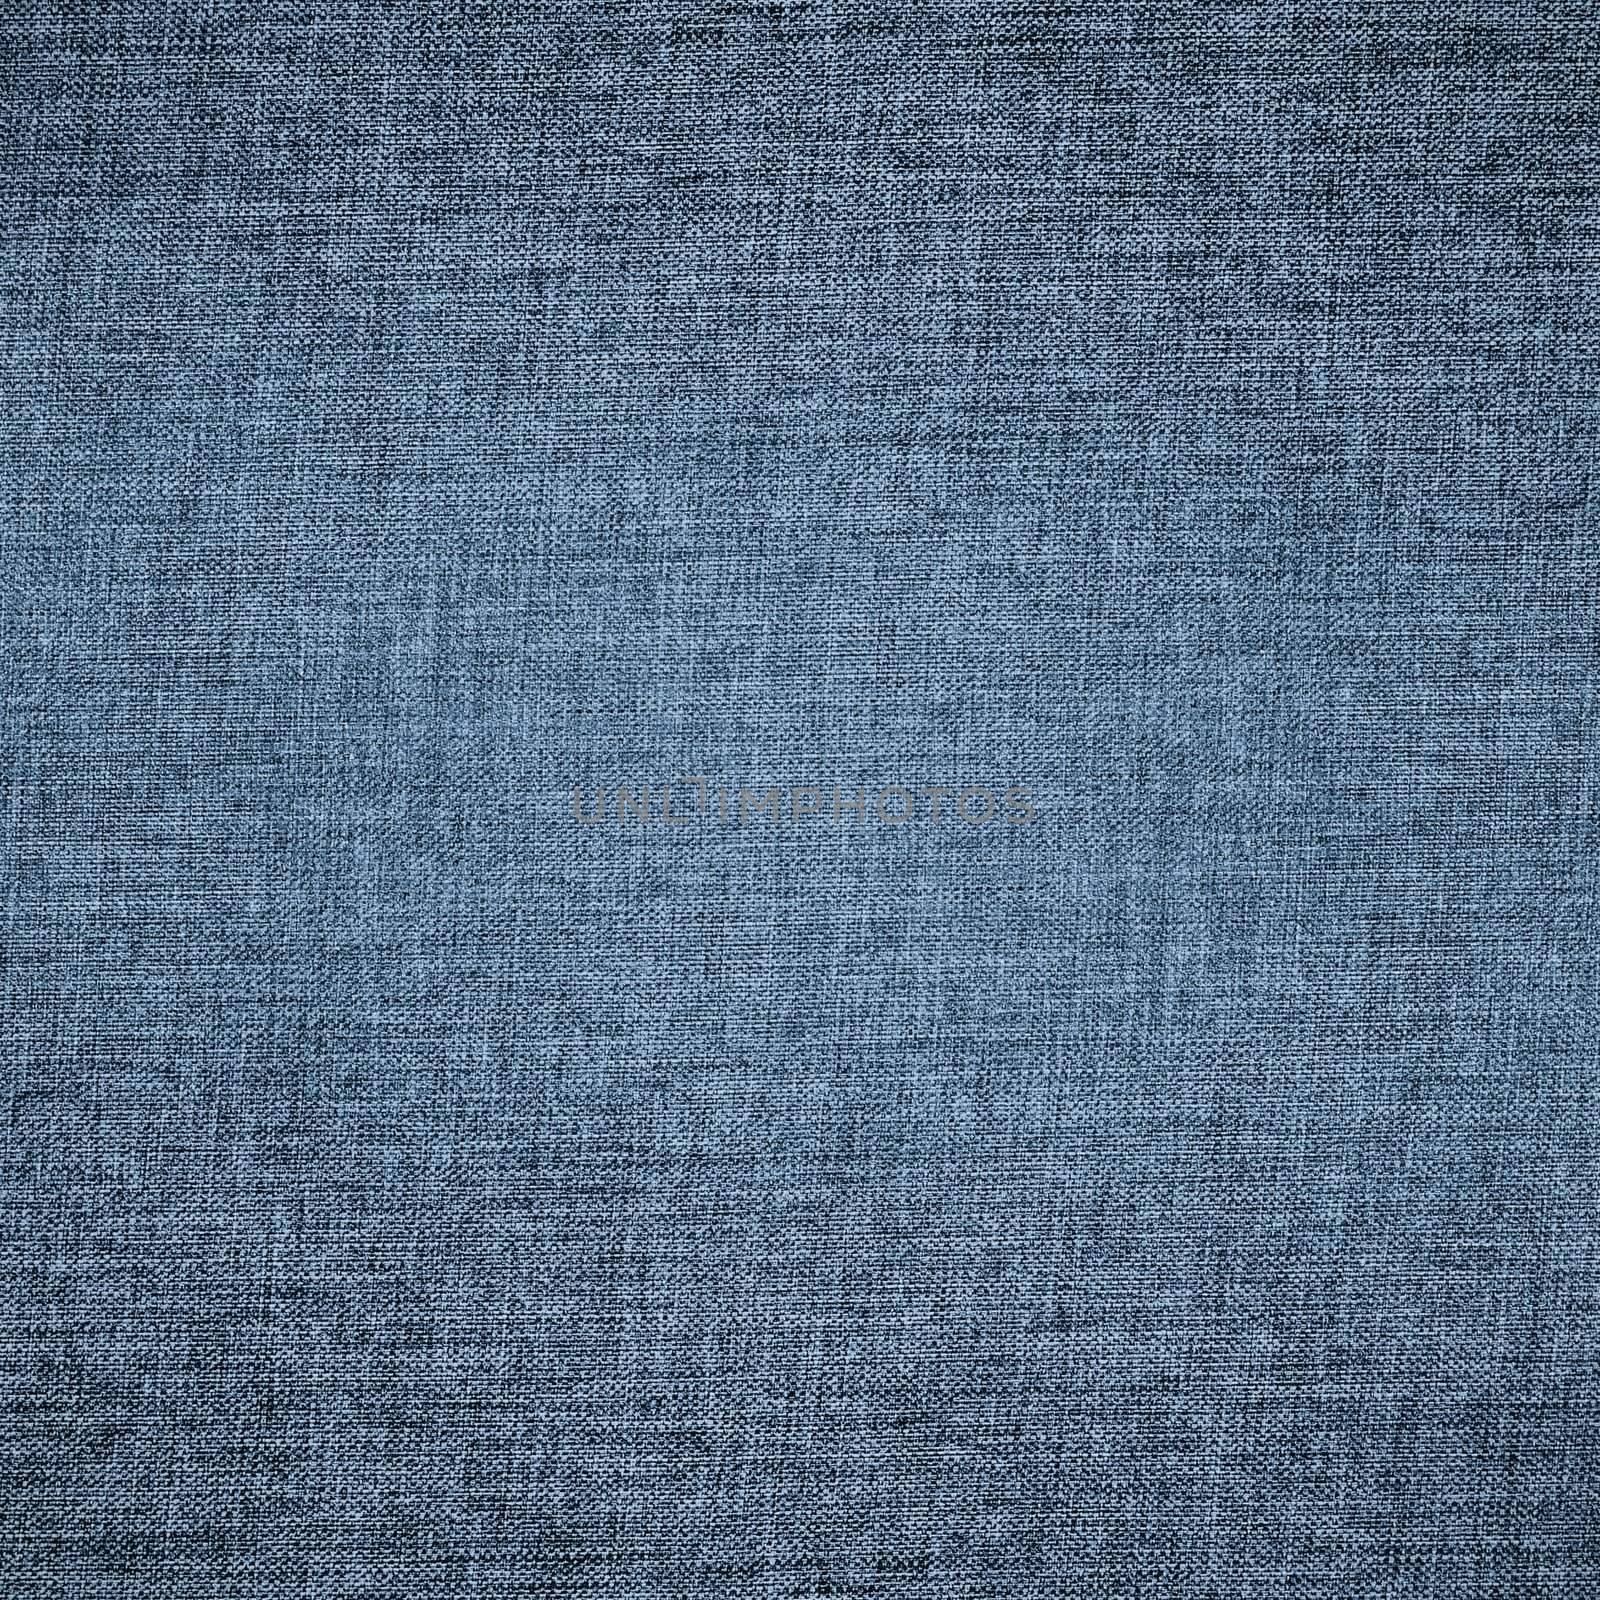 Material jeans texture background by simpson33